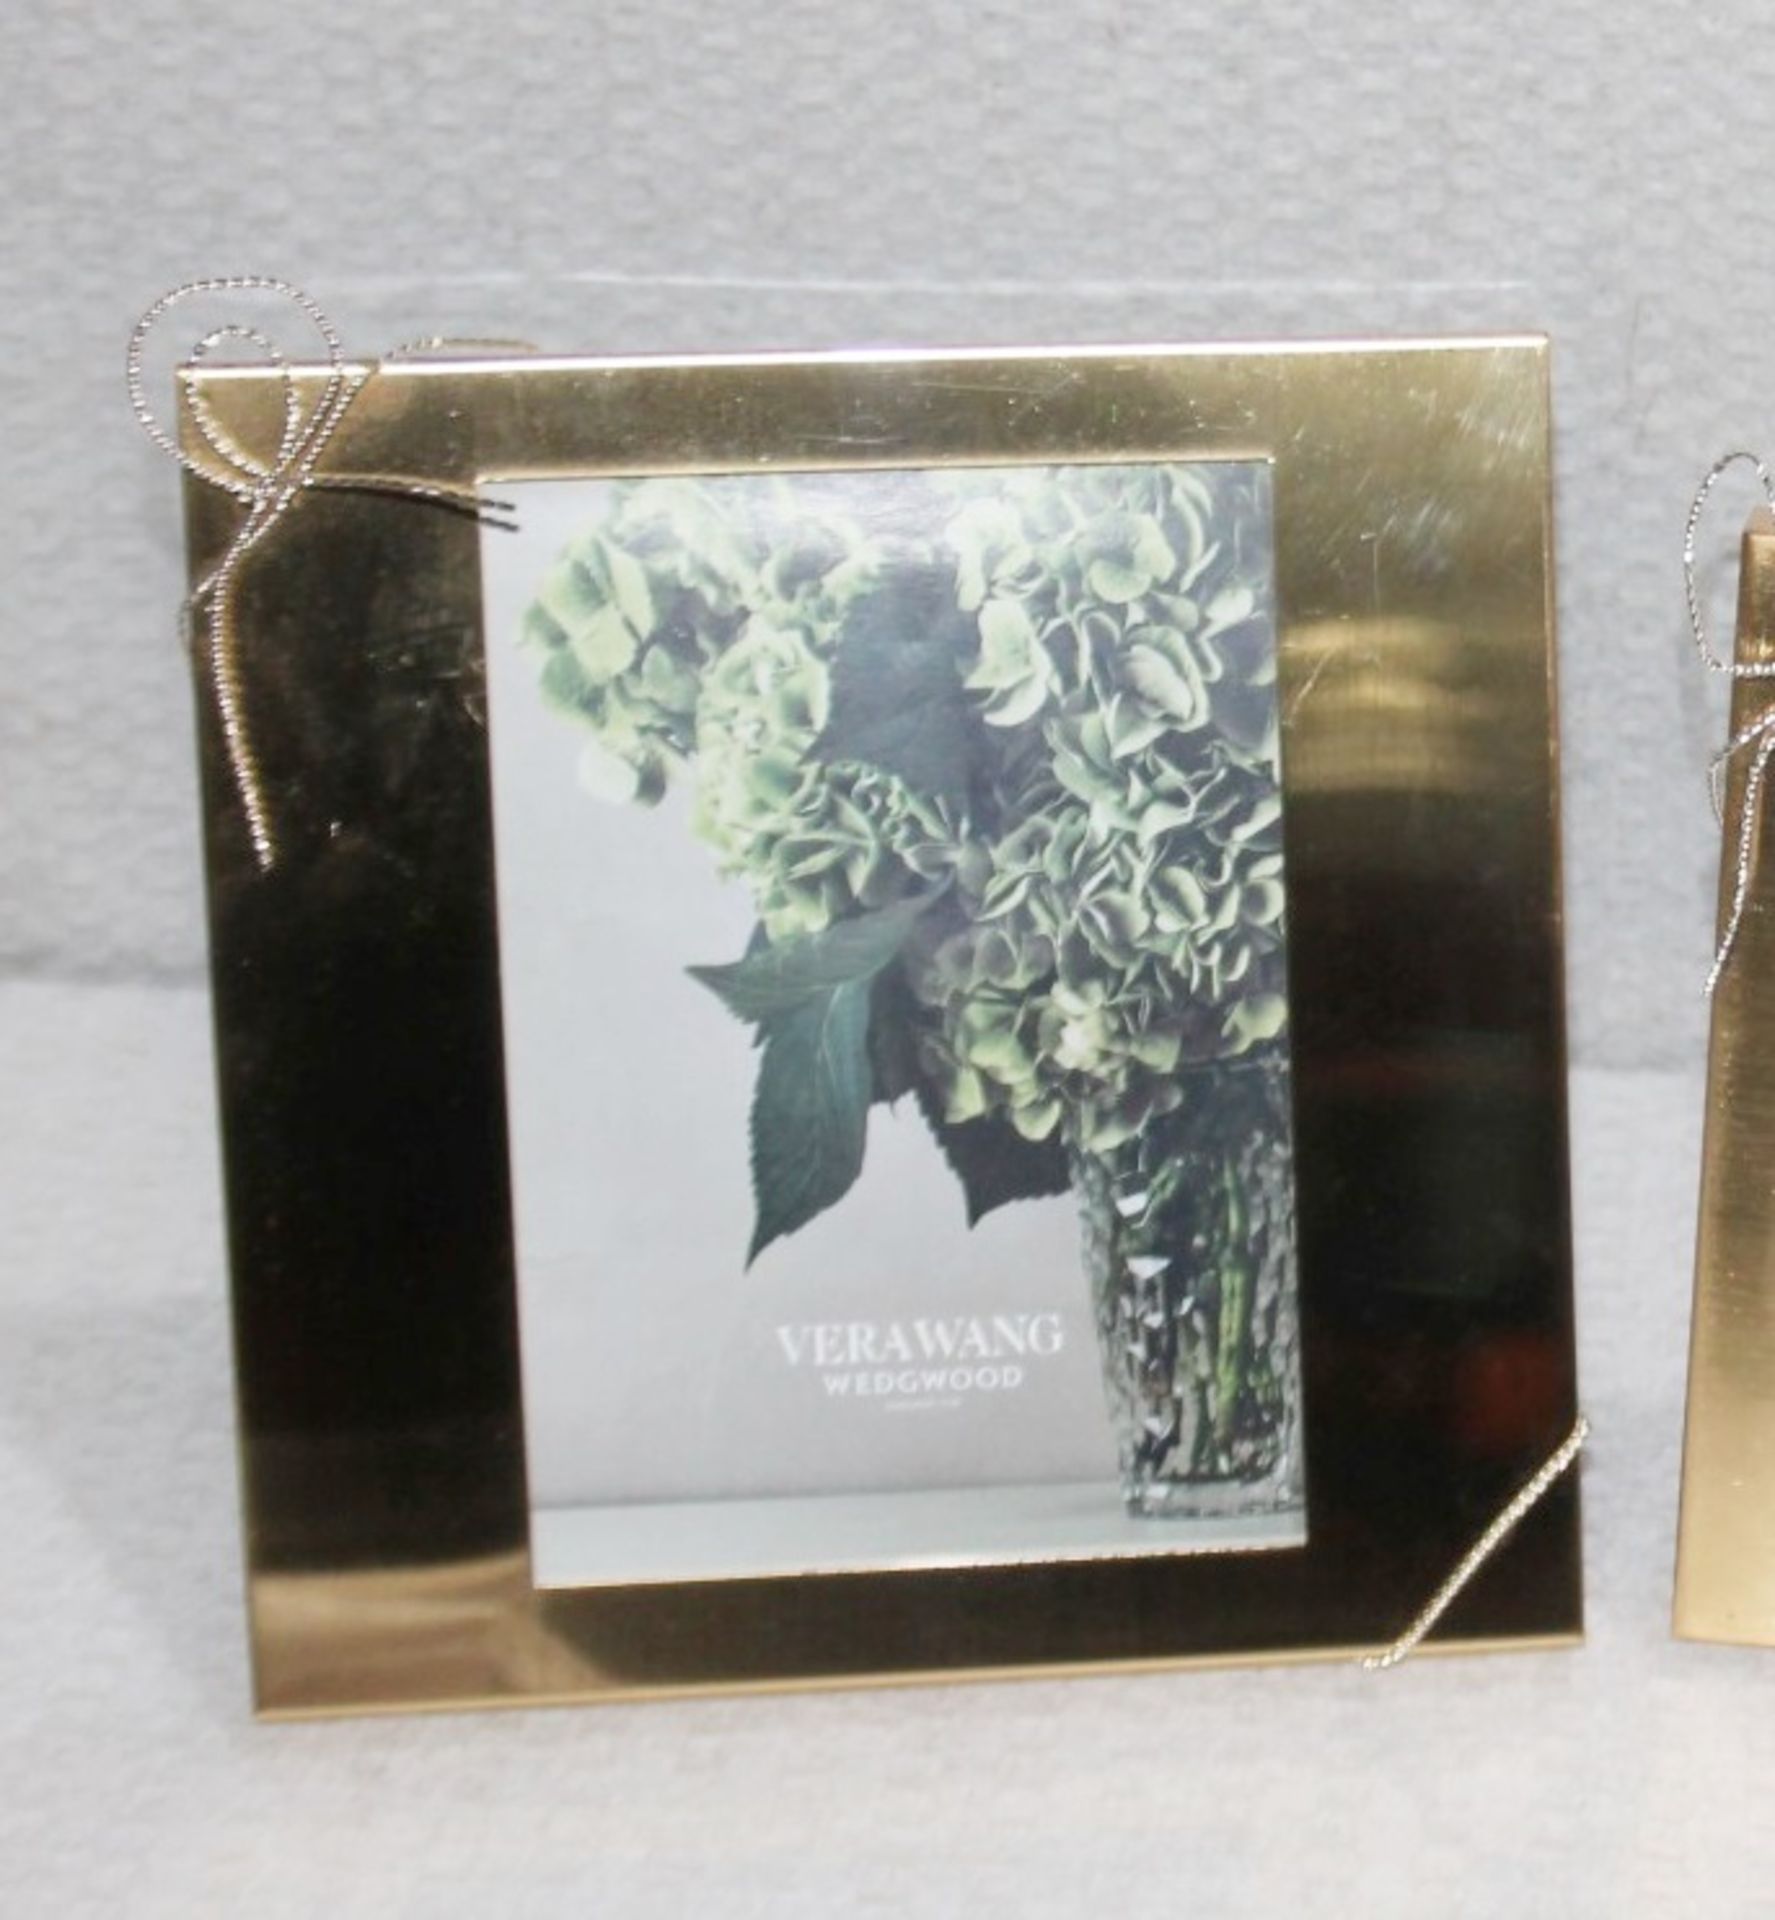 2 x VERA WANG / WEDGWOOD 'Love Knots' Gold Photo Frames - 2 Sizes Included - Total Original Price £ - Image 6 of 6